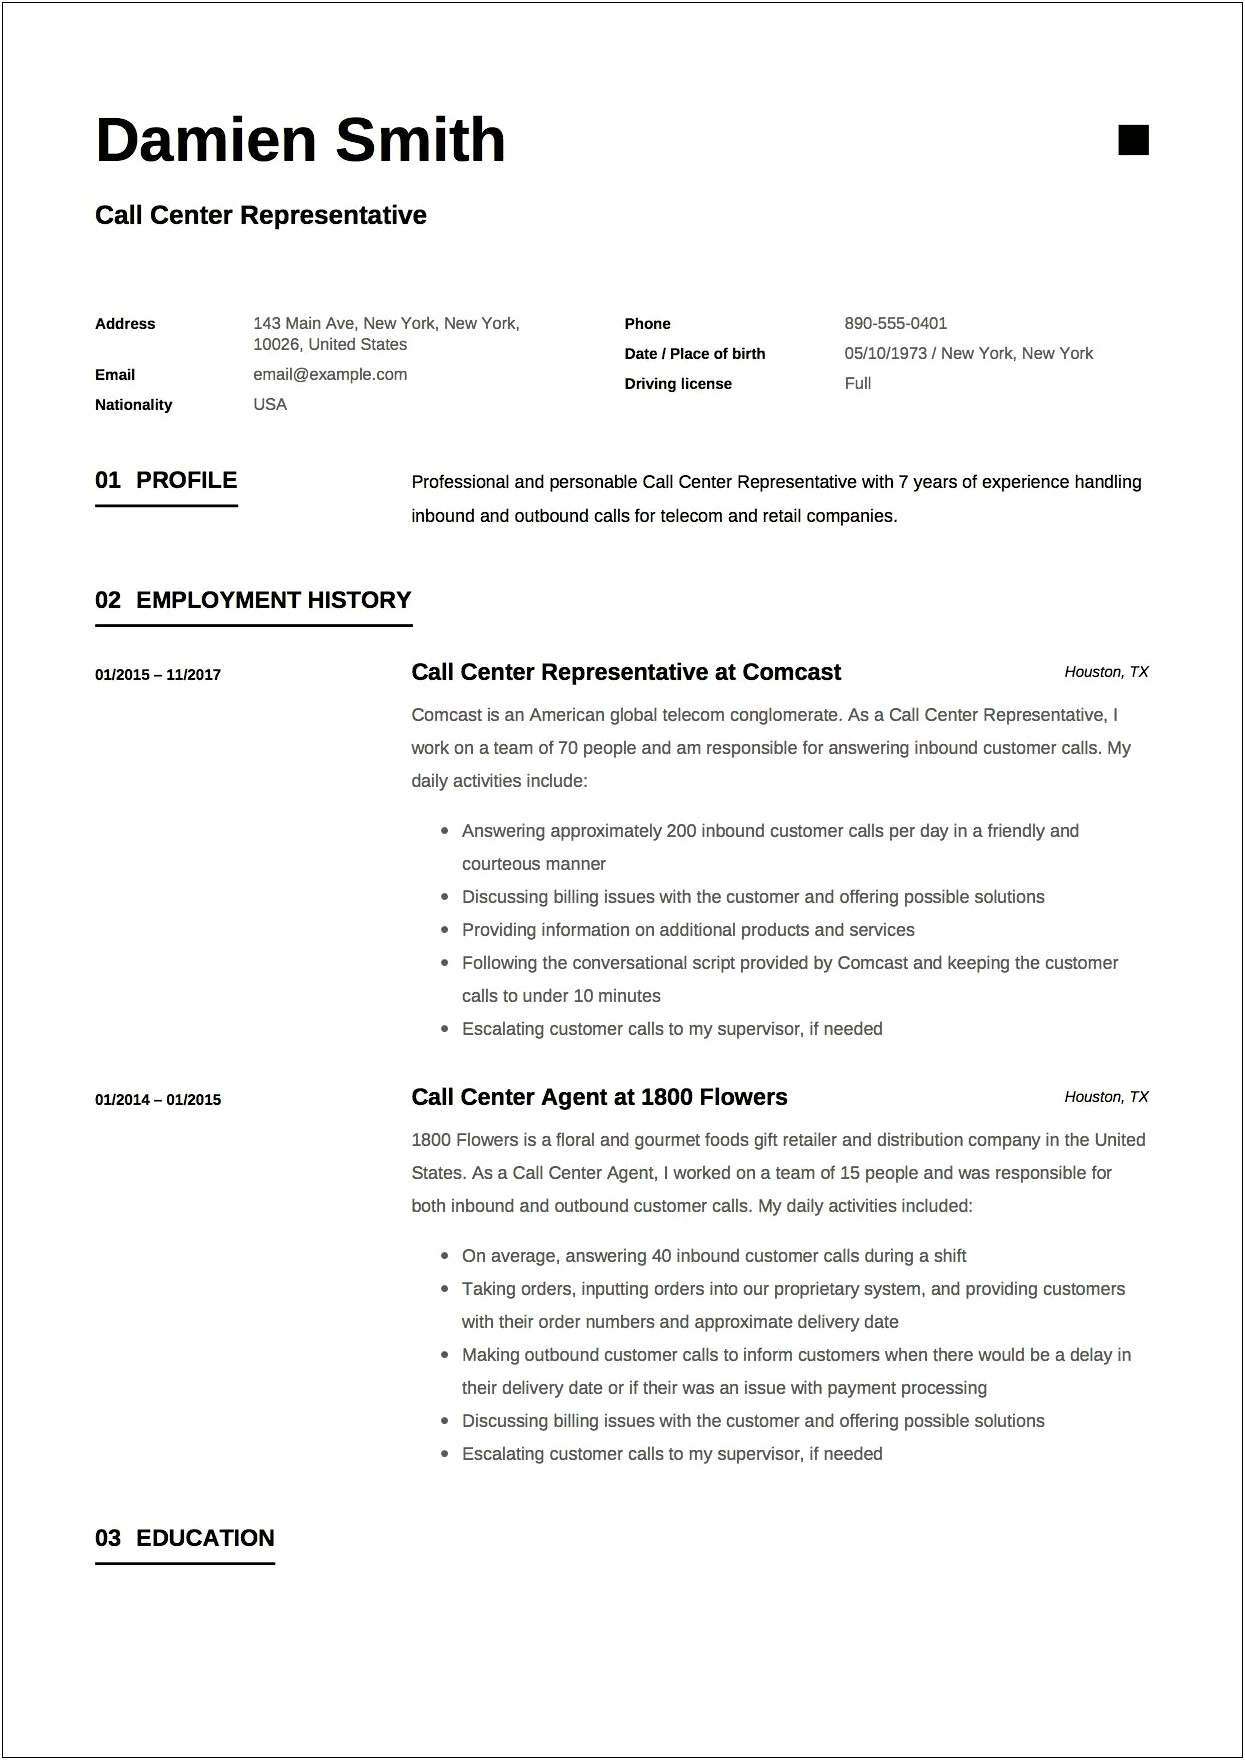 Resume Sample With Addresses And Phone Numbers